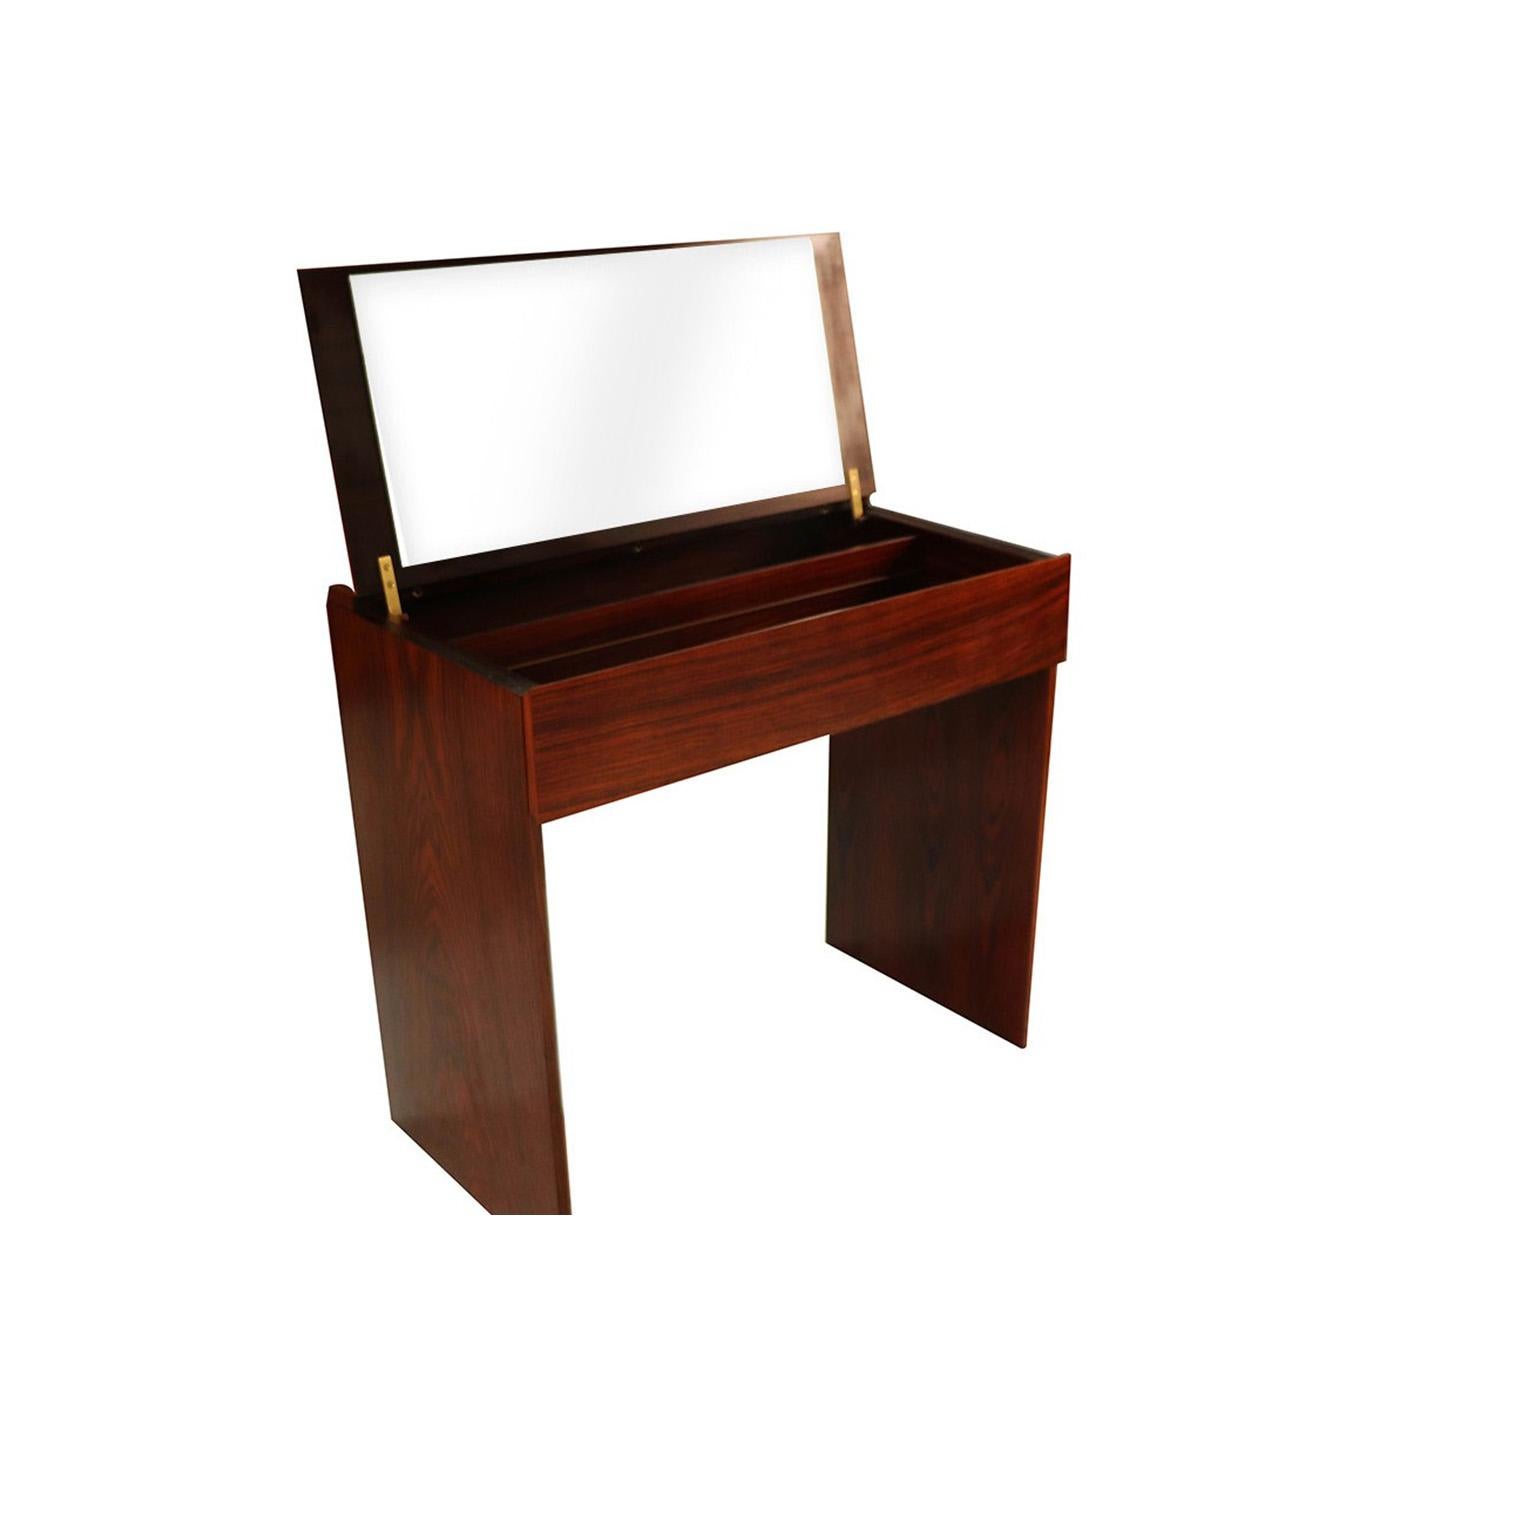 Beautiful Danish modern rosewood, vanity, desk, dressing table, circa 1960s, designed by Arne Wahl Iversen and produced in Denmark by Vinde Møbelfabrik. This piece is an exceptional craftsmanship with beautiful interior, construction is structurally